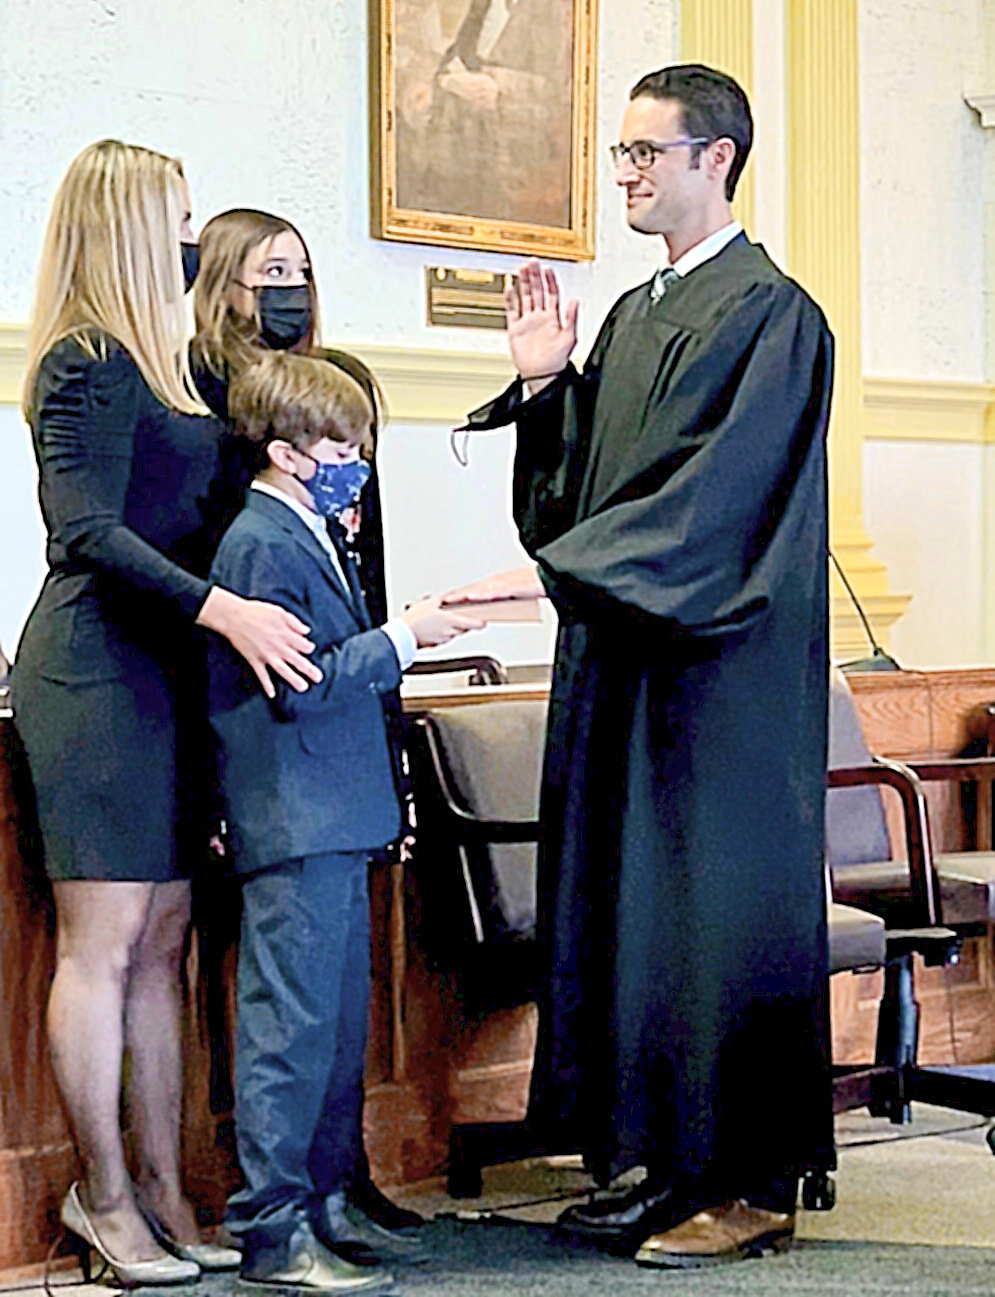 SWORN IN — Jason Flemma was sworn in as the newest Oneida County Family Court Judge on Wednesday in the Ceremonial Courtroom at the Oneida County Courthouse in Utica. Oneida County Family Court Judge Julia M. Brouillette, officiated. Due to COVID-19 restrictions, the swearing in attendance was limited. Present, and pictured were Flemma’s wife Alana, daughter Isadora and son Sebastian.